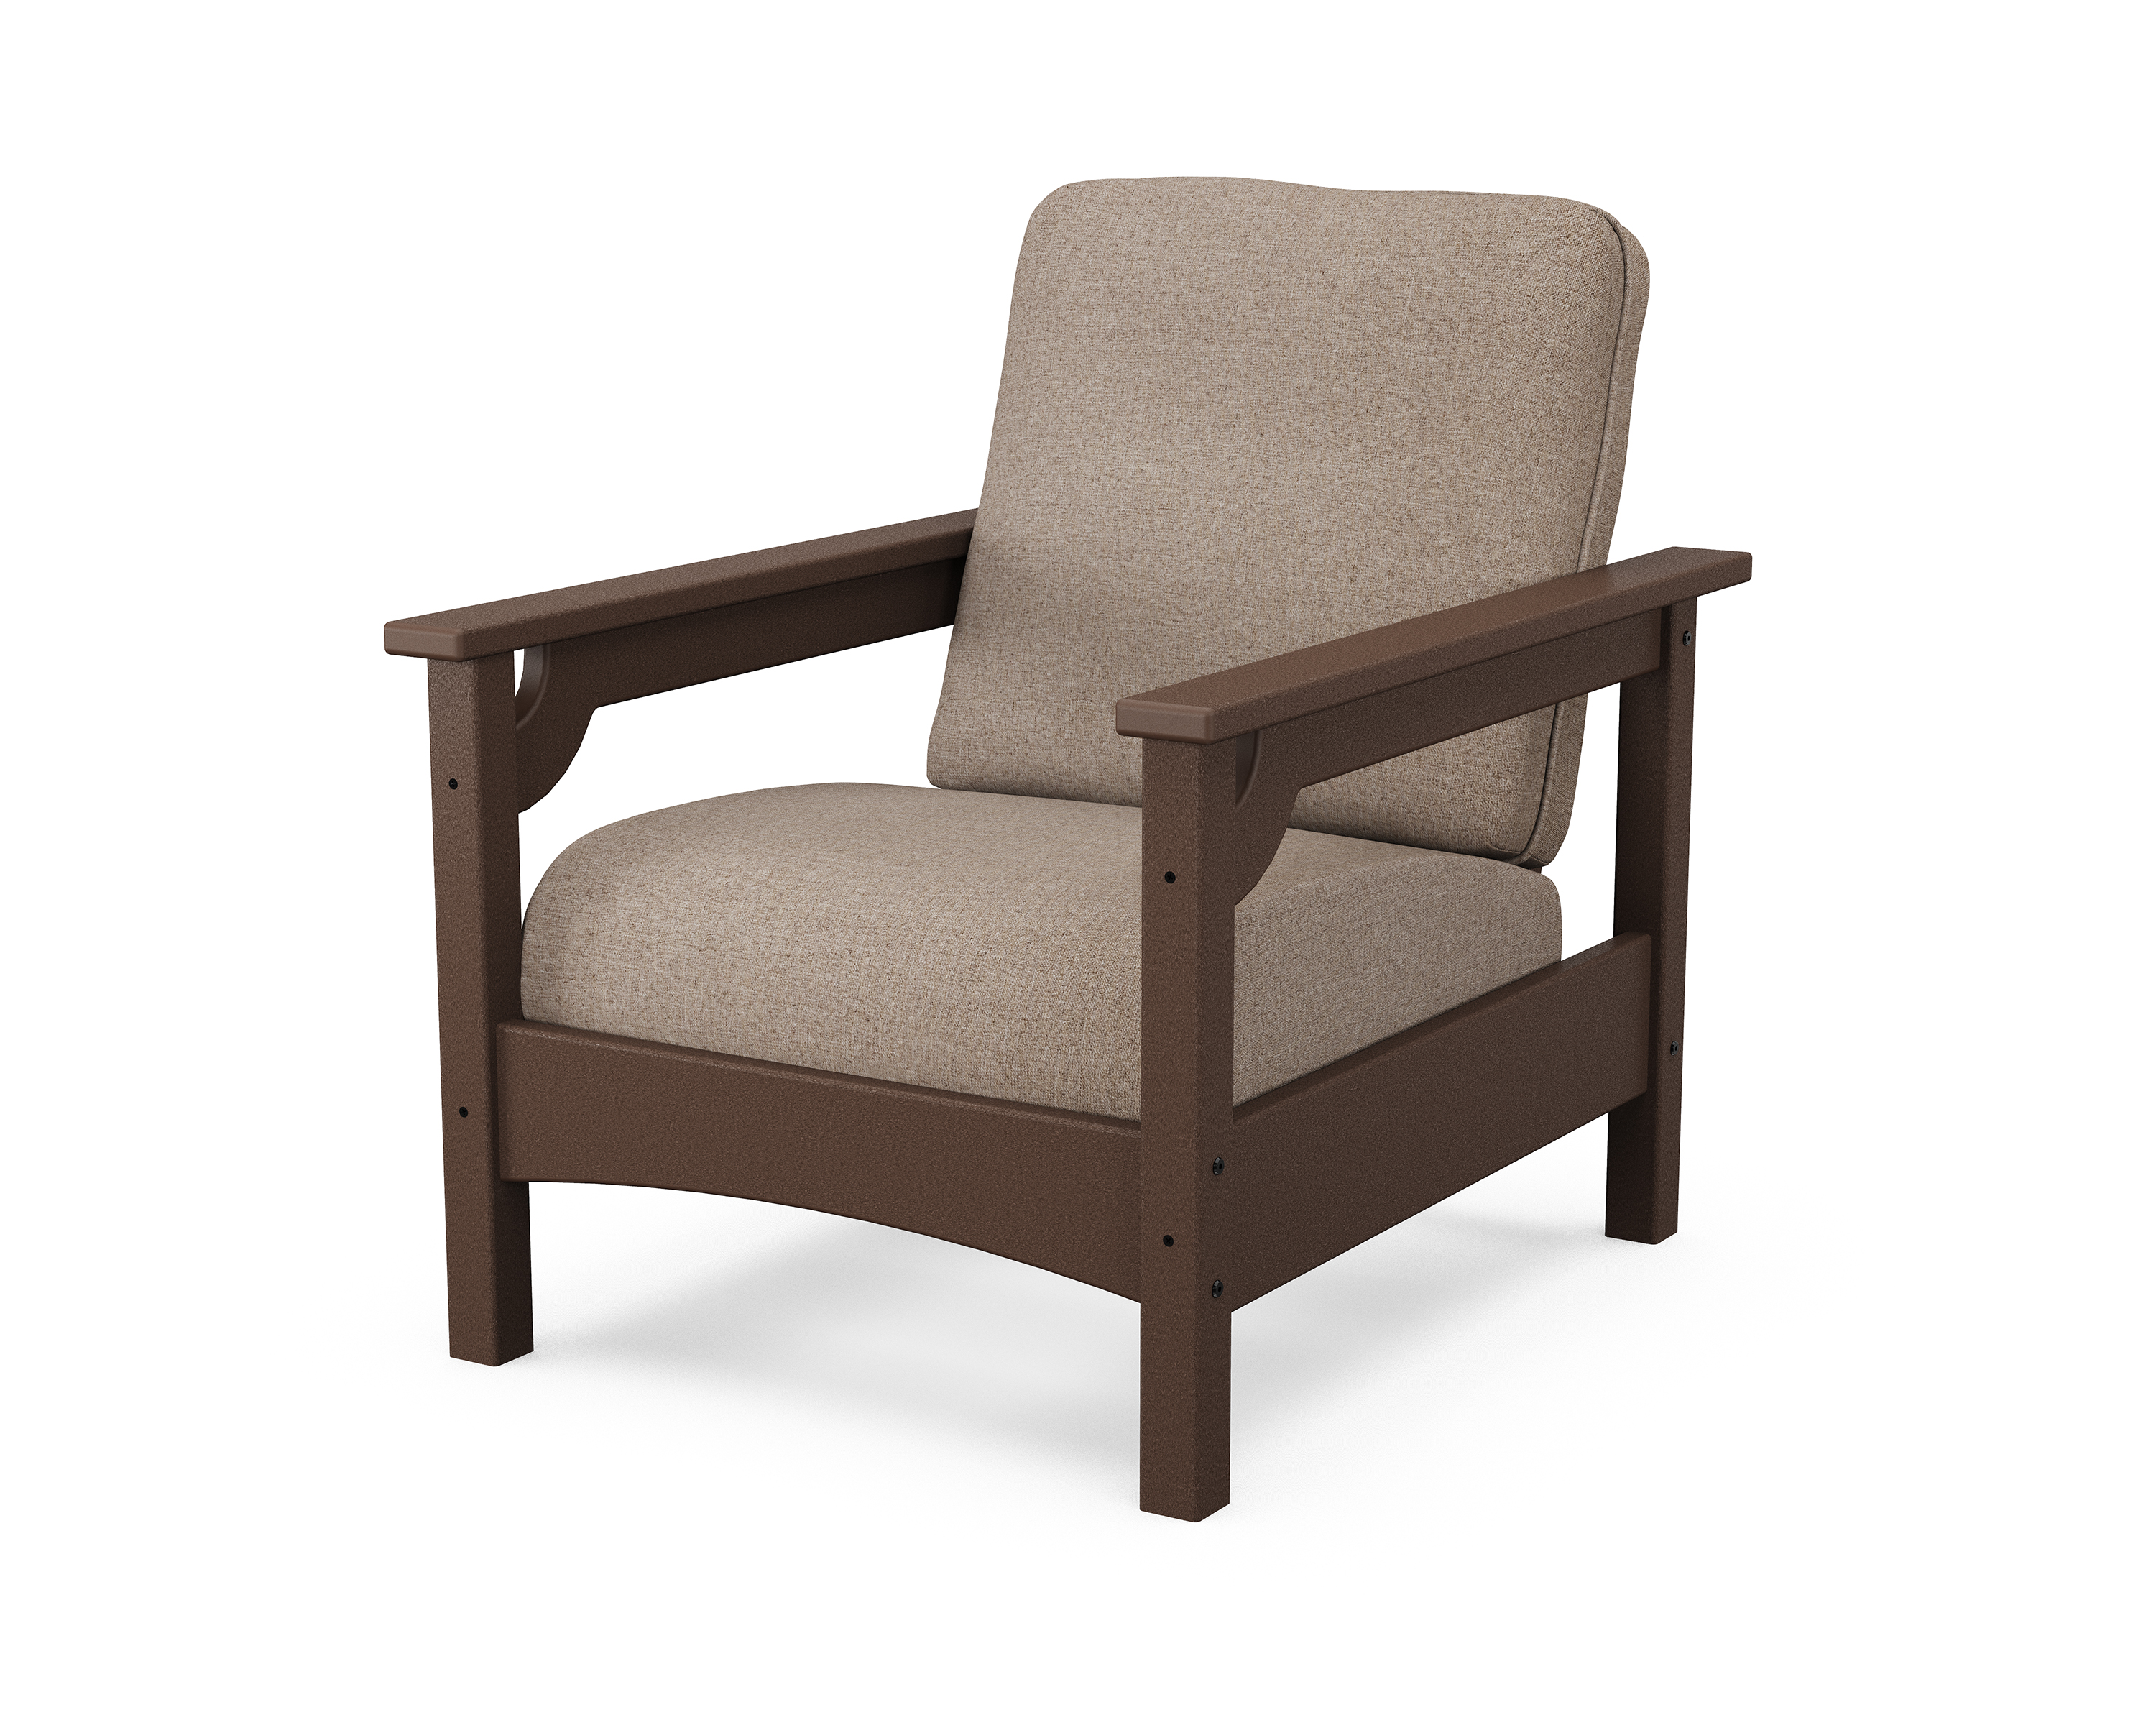 club chair in mahogany / spiced burlap product image